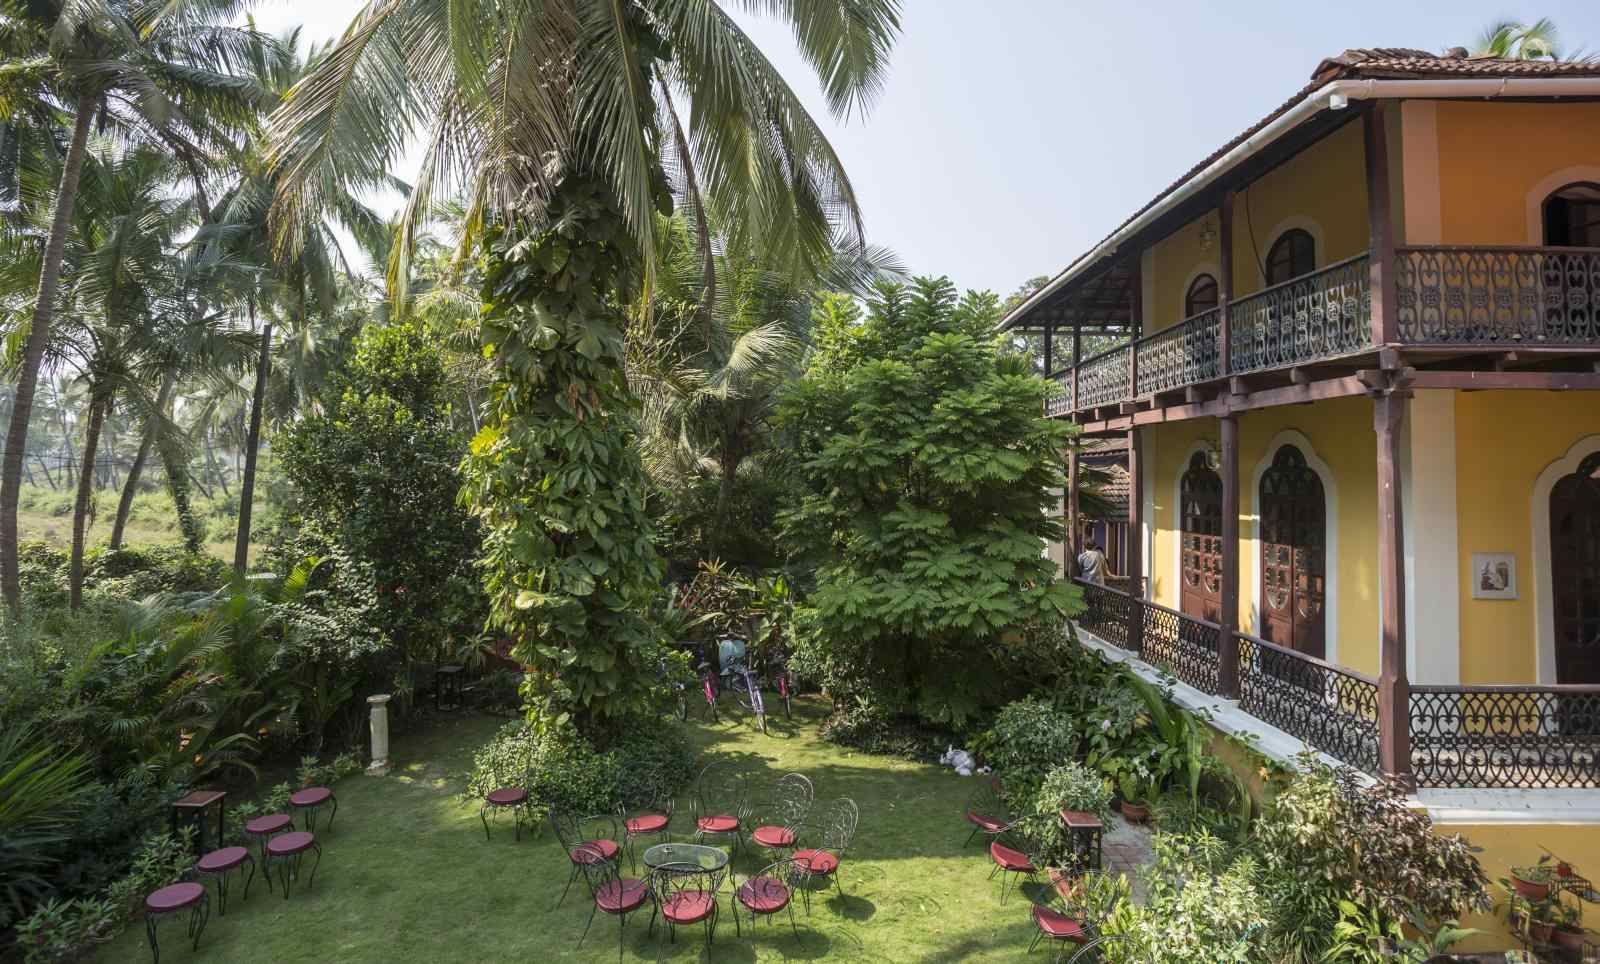 At Casa Menezes guests can enjoy authentic Goan cuisine while marvelling at the heritage architecture